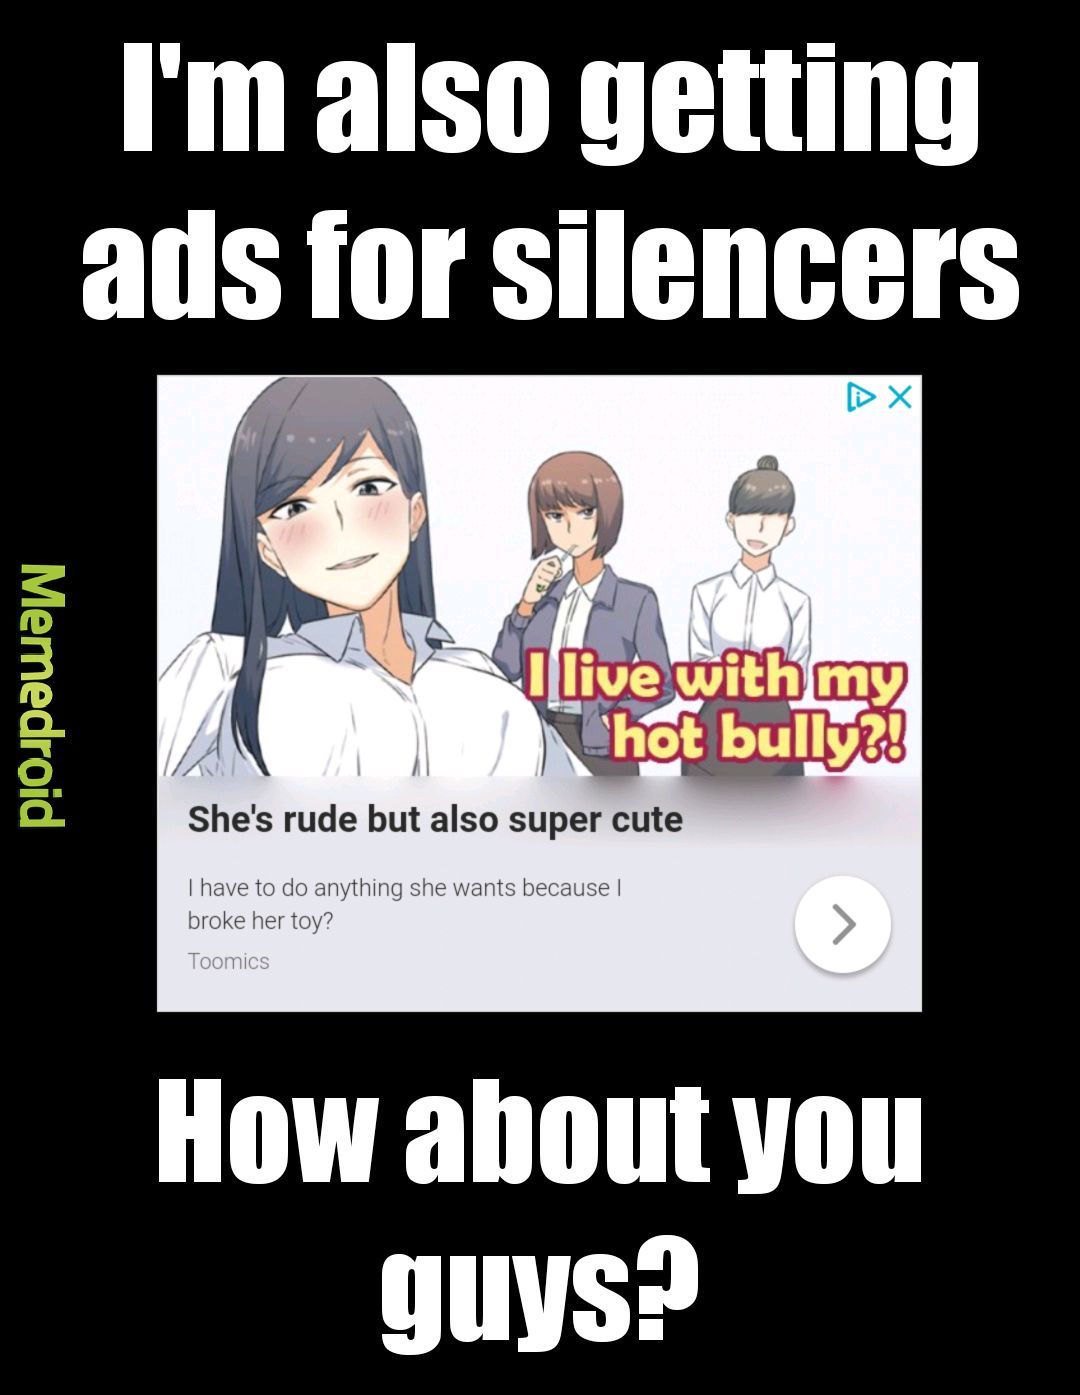 And ads for ammo, too - meme